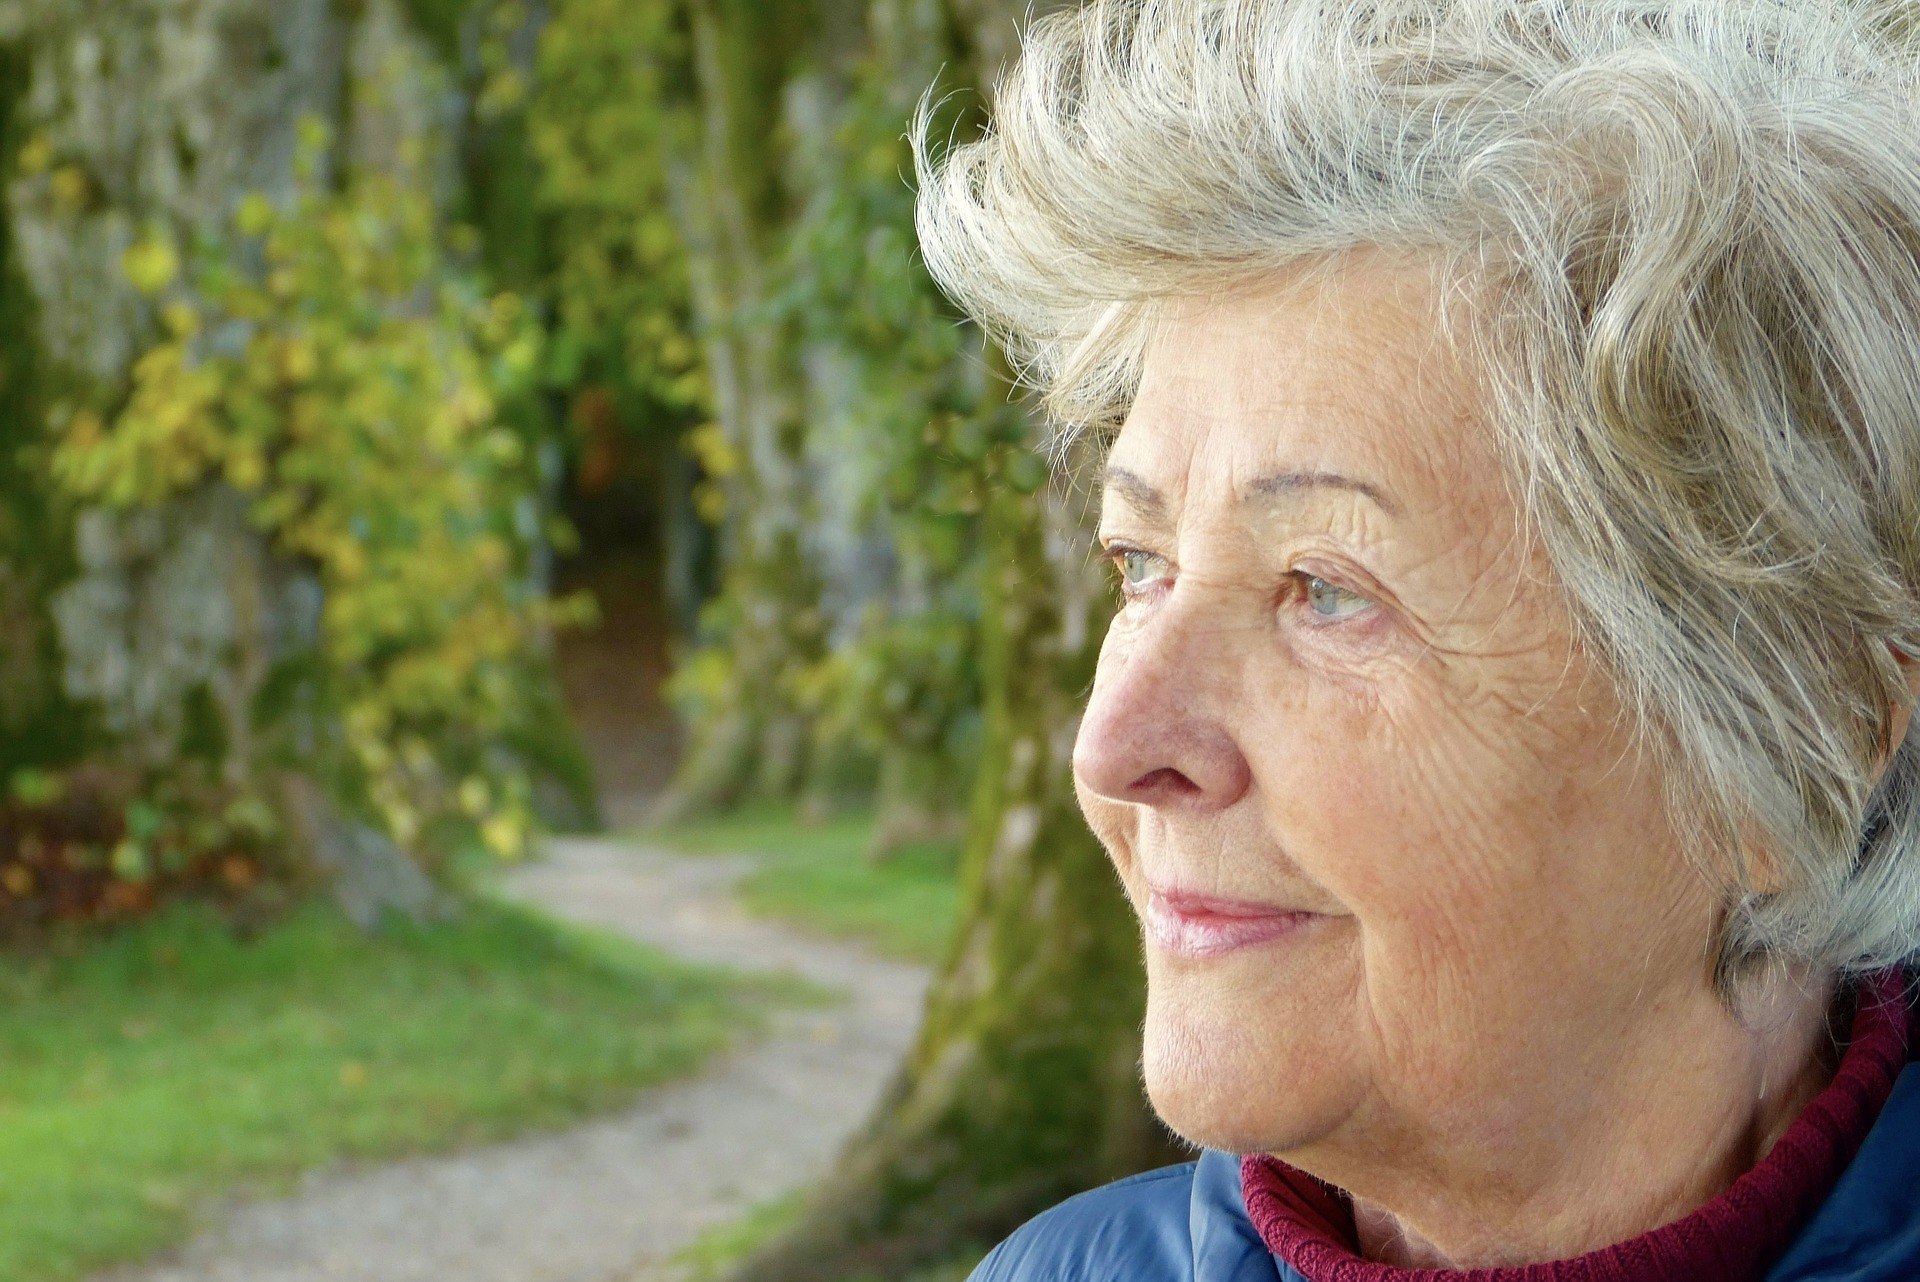 assisted-living-myths-misconceptions